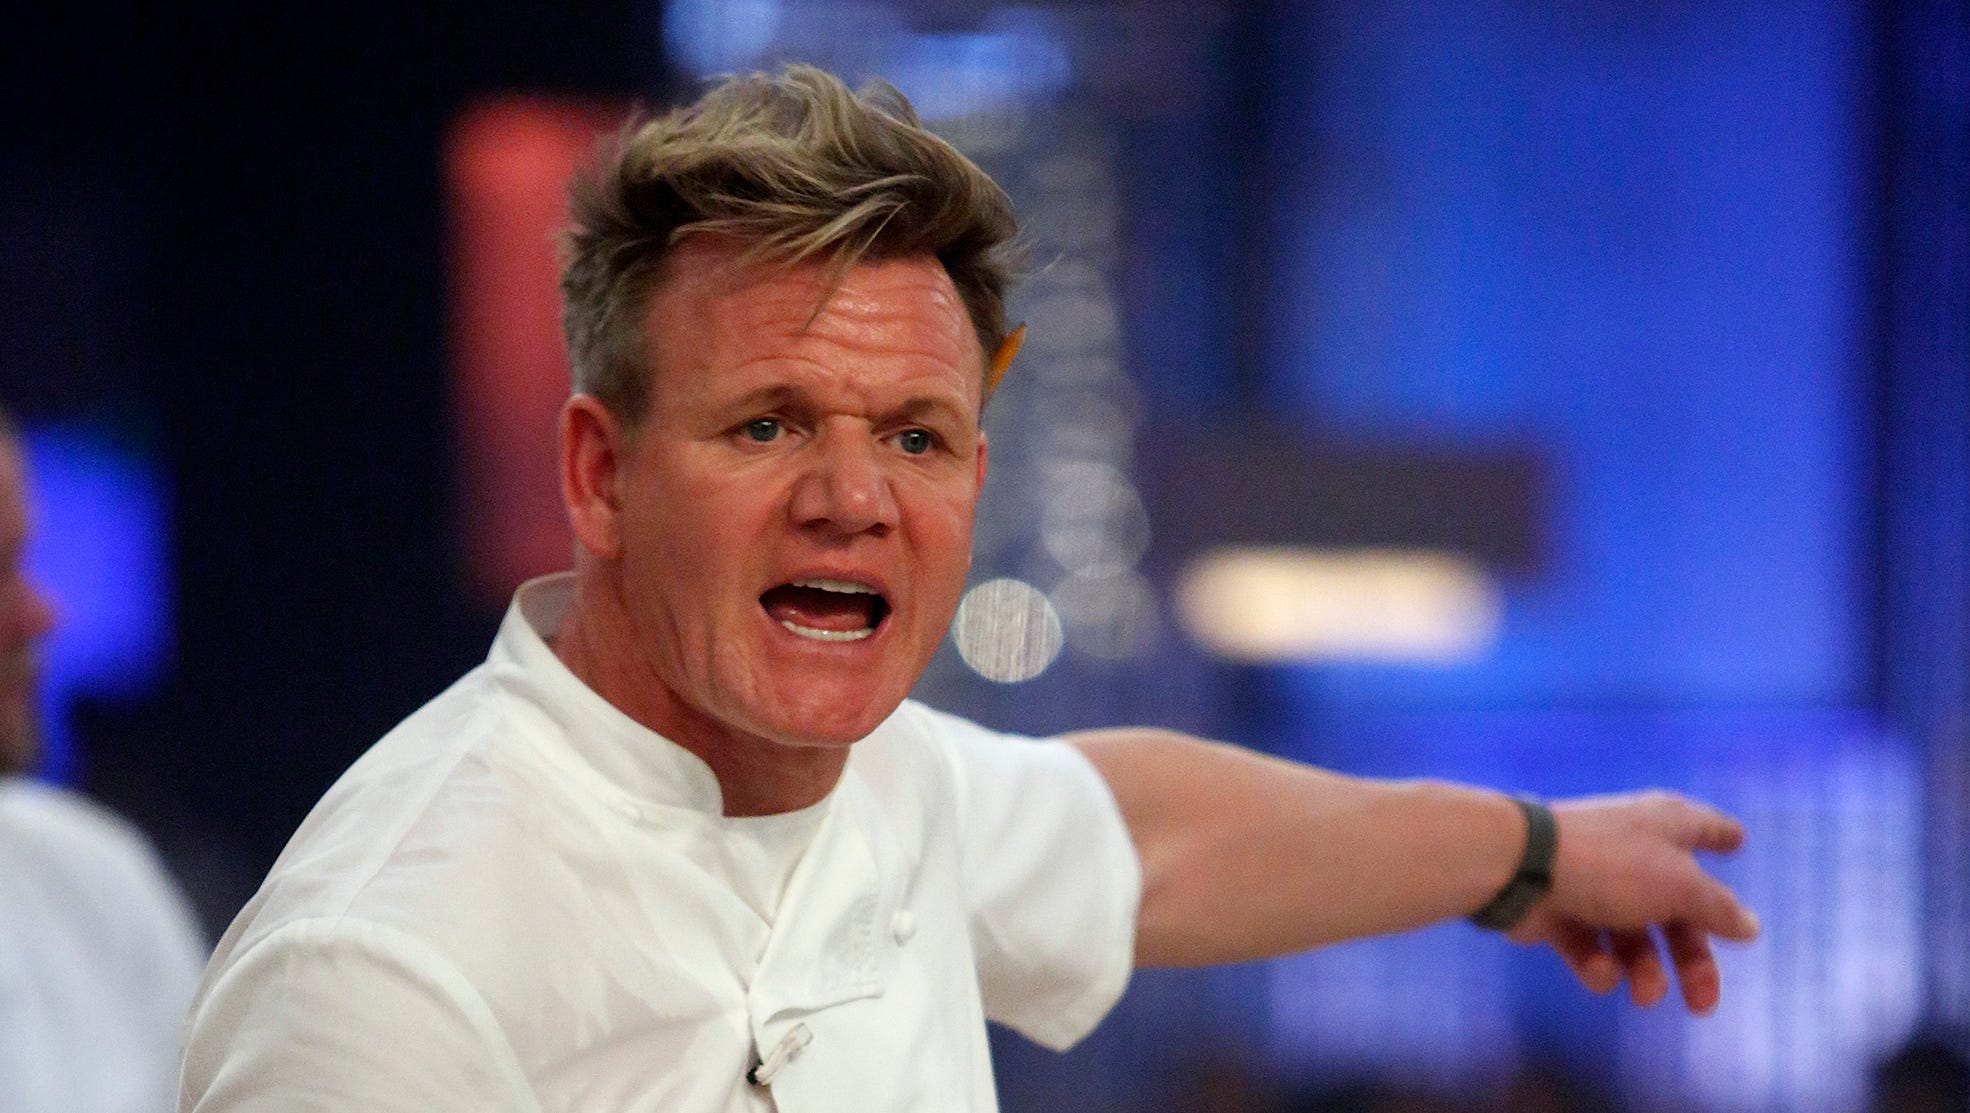 Gordon Ramsay's Blue Hair Chef Outfit - wide 11